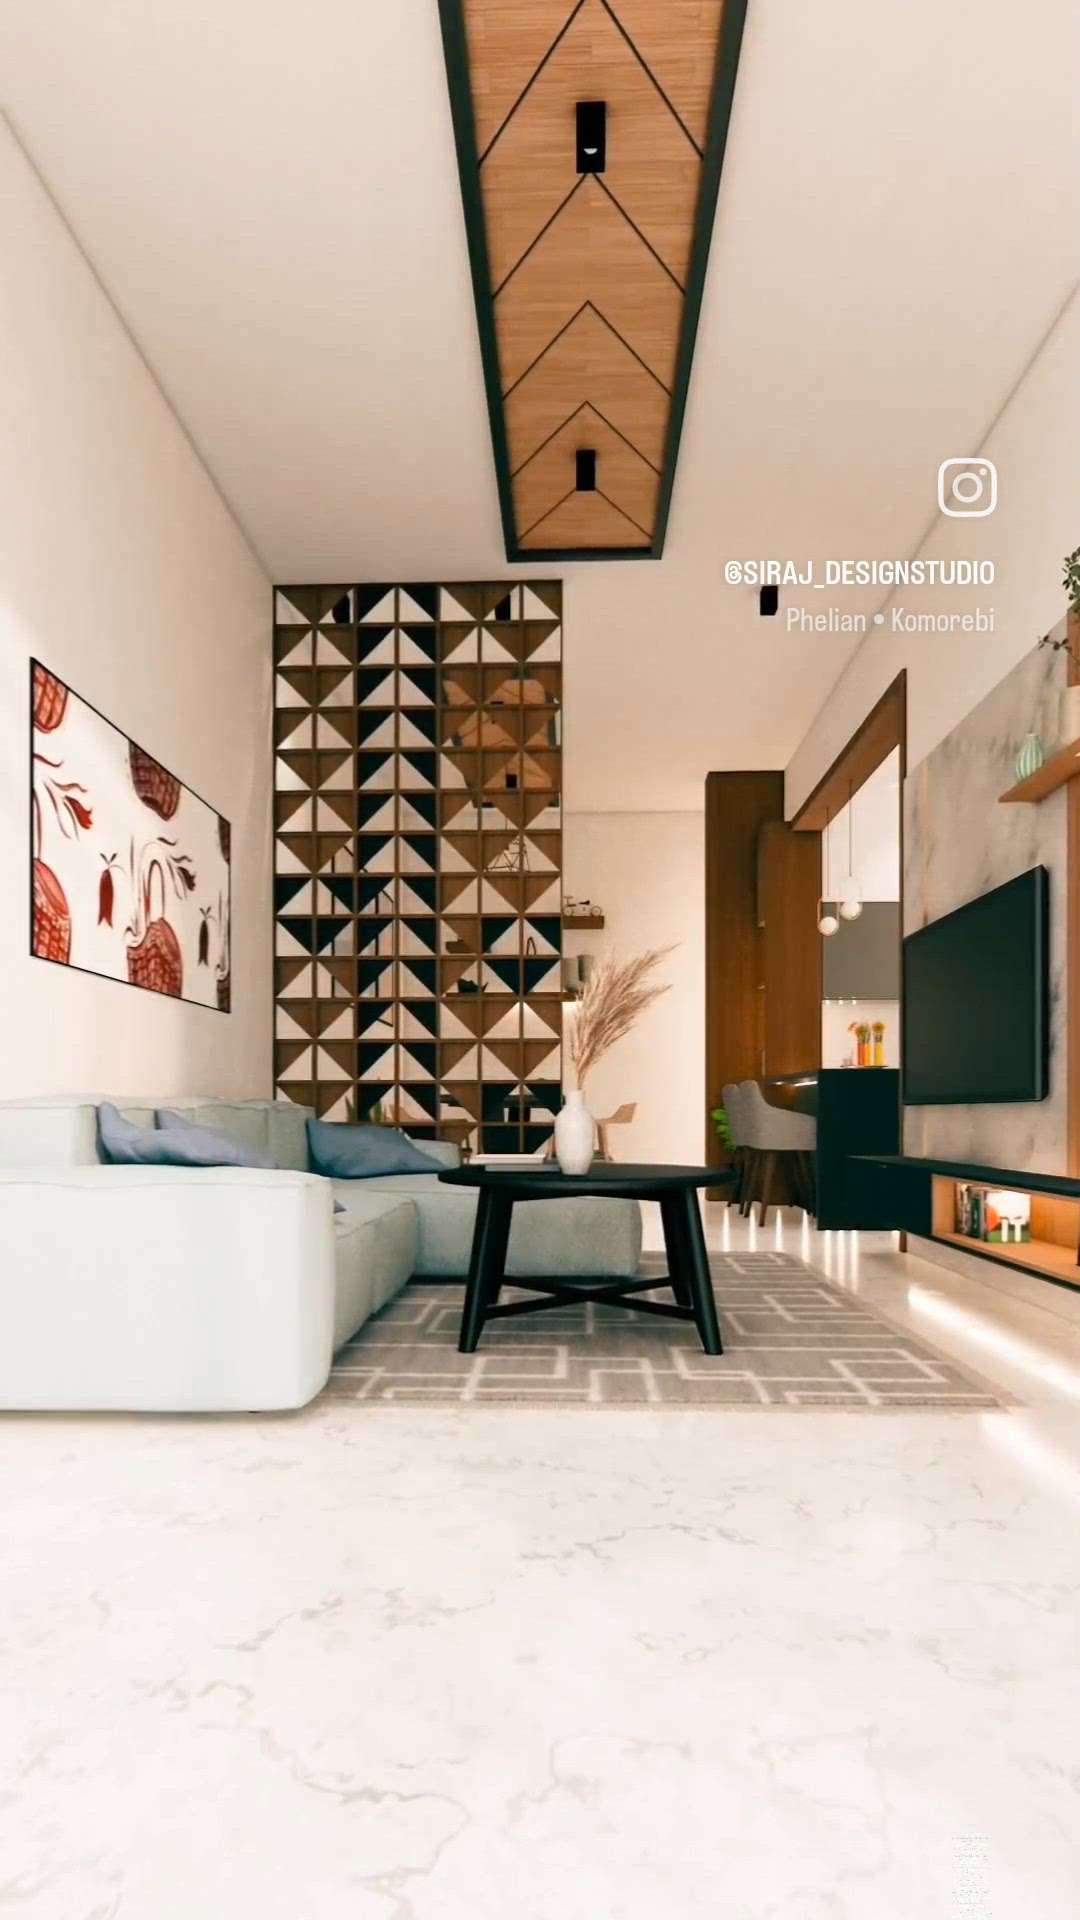 Watch your space come to life! ✨Swipe through for a visual journey that's sure to spark your imagination! 
#AnimatedInteriors #DesignDreams #enscape
#3d #interiordesign #architecture